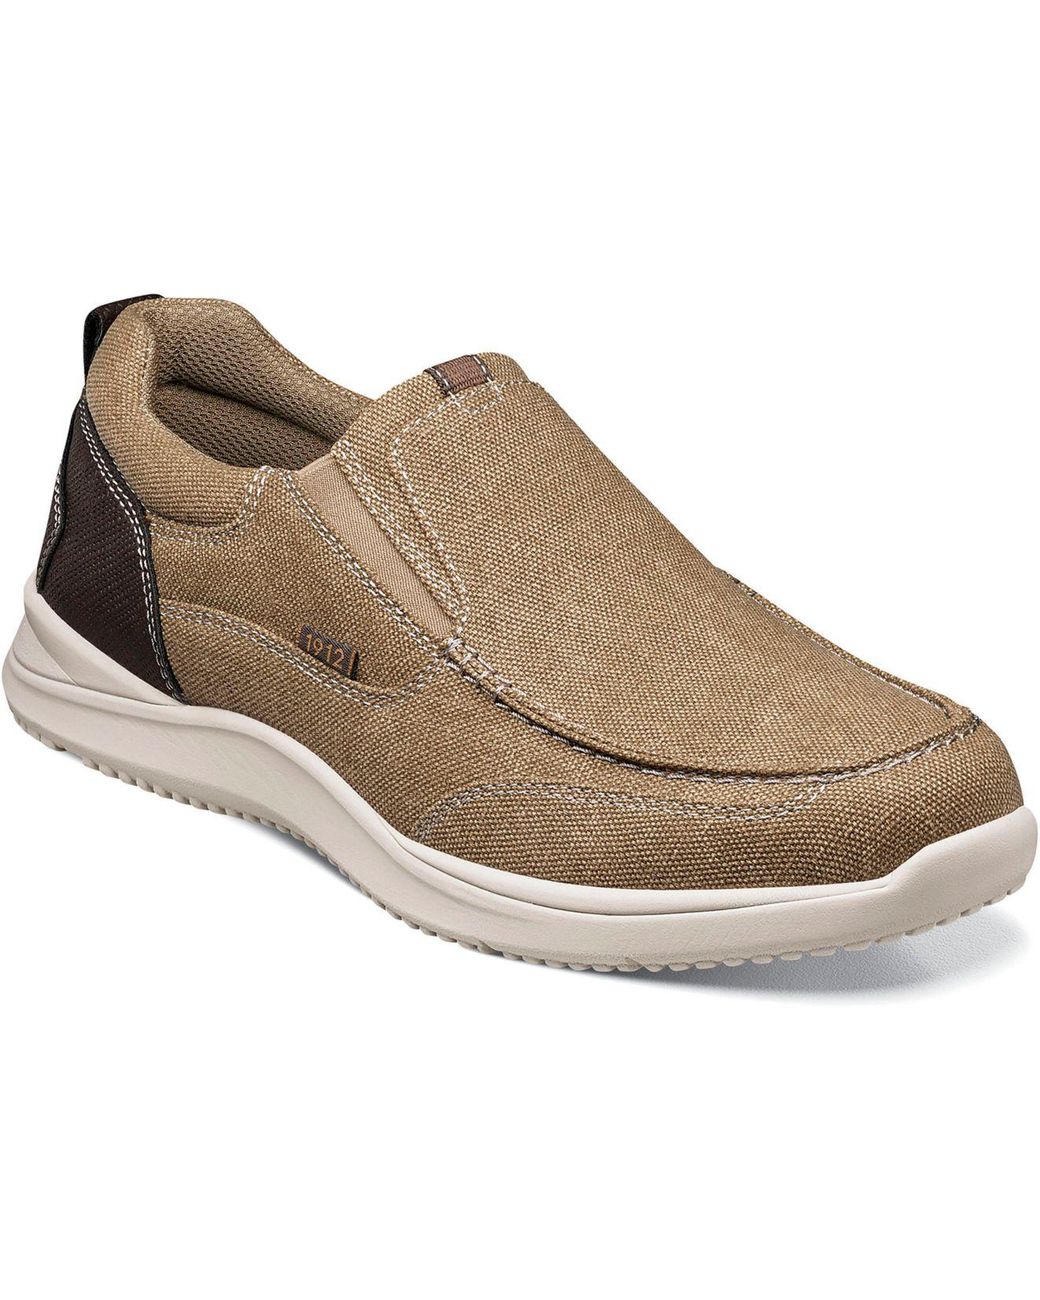 Nunn Bush Conway Canvas Moc Toe Slip-on Loafer in Khaki (Natural) for ...